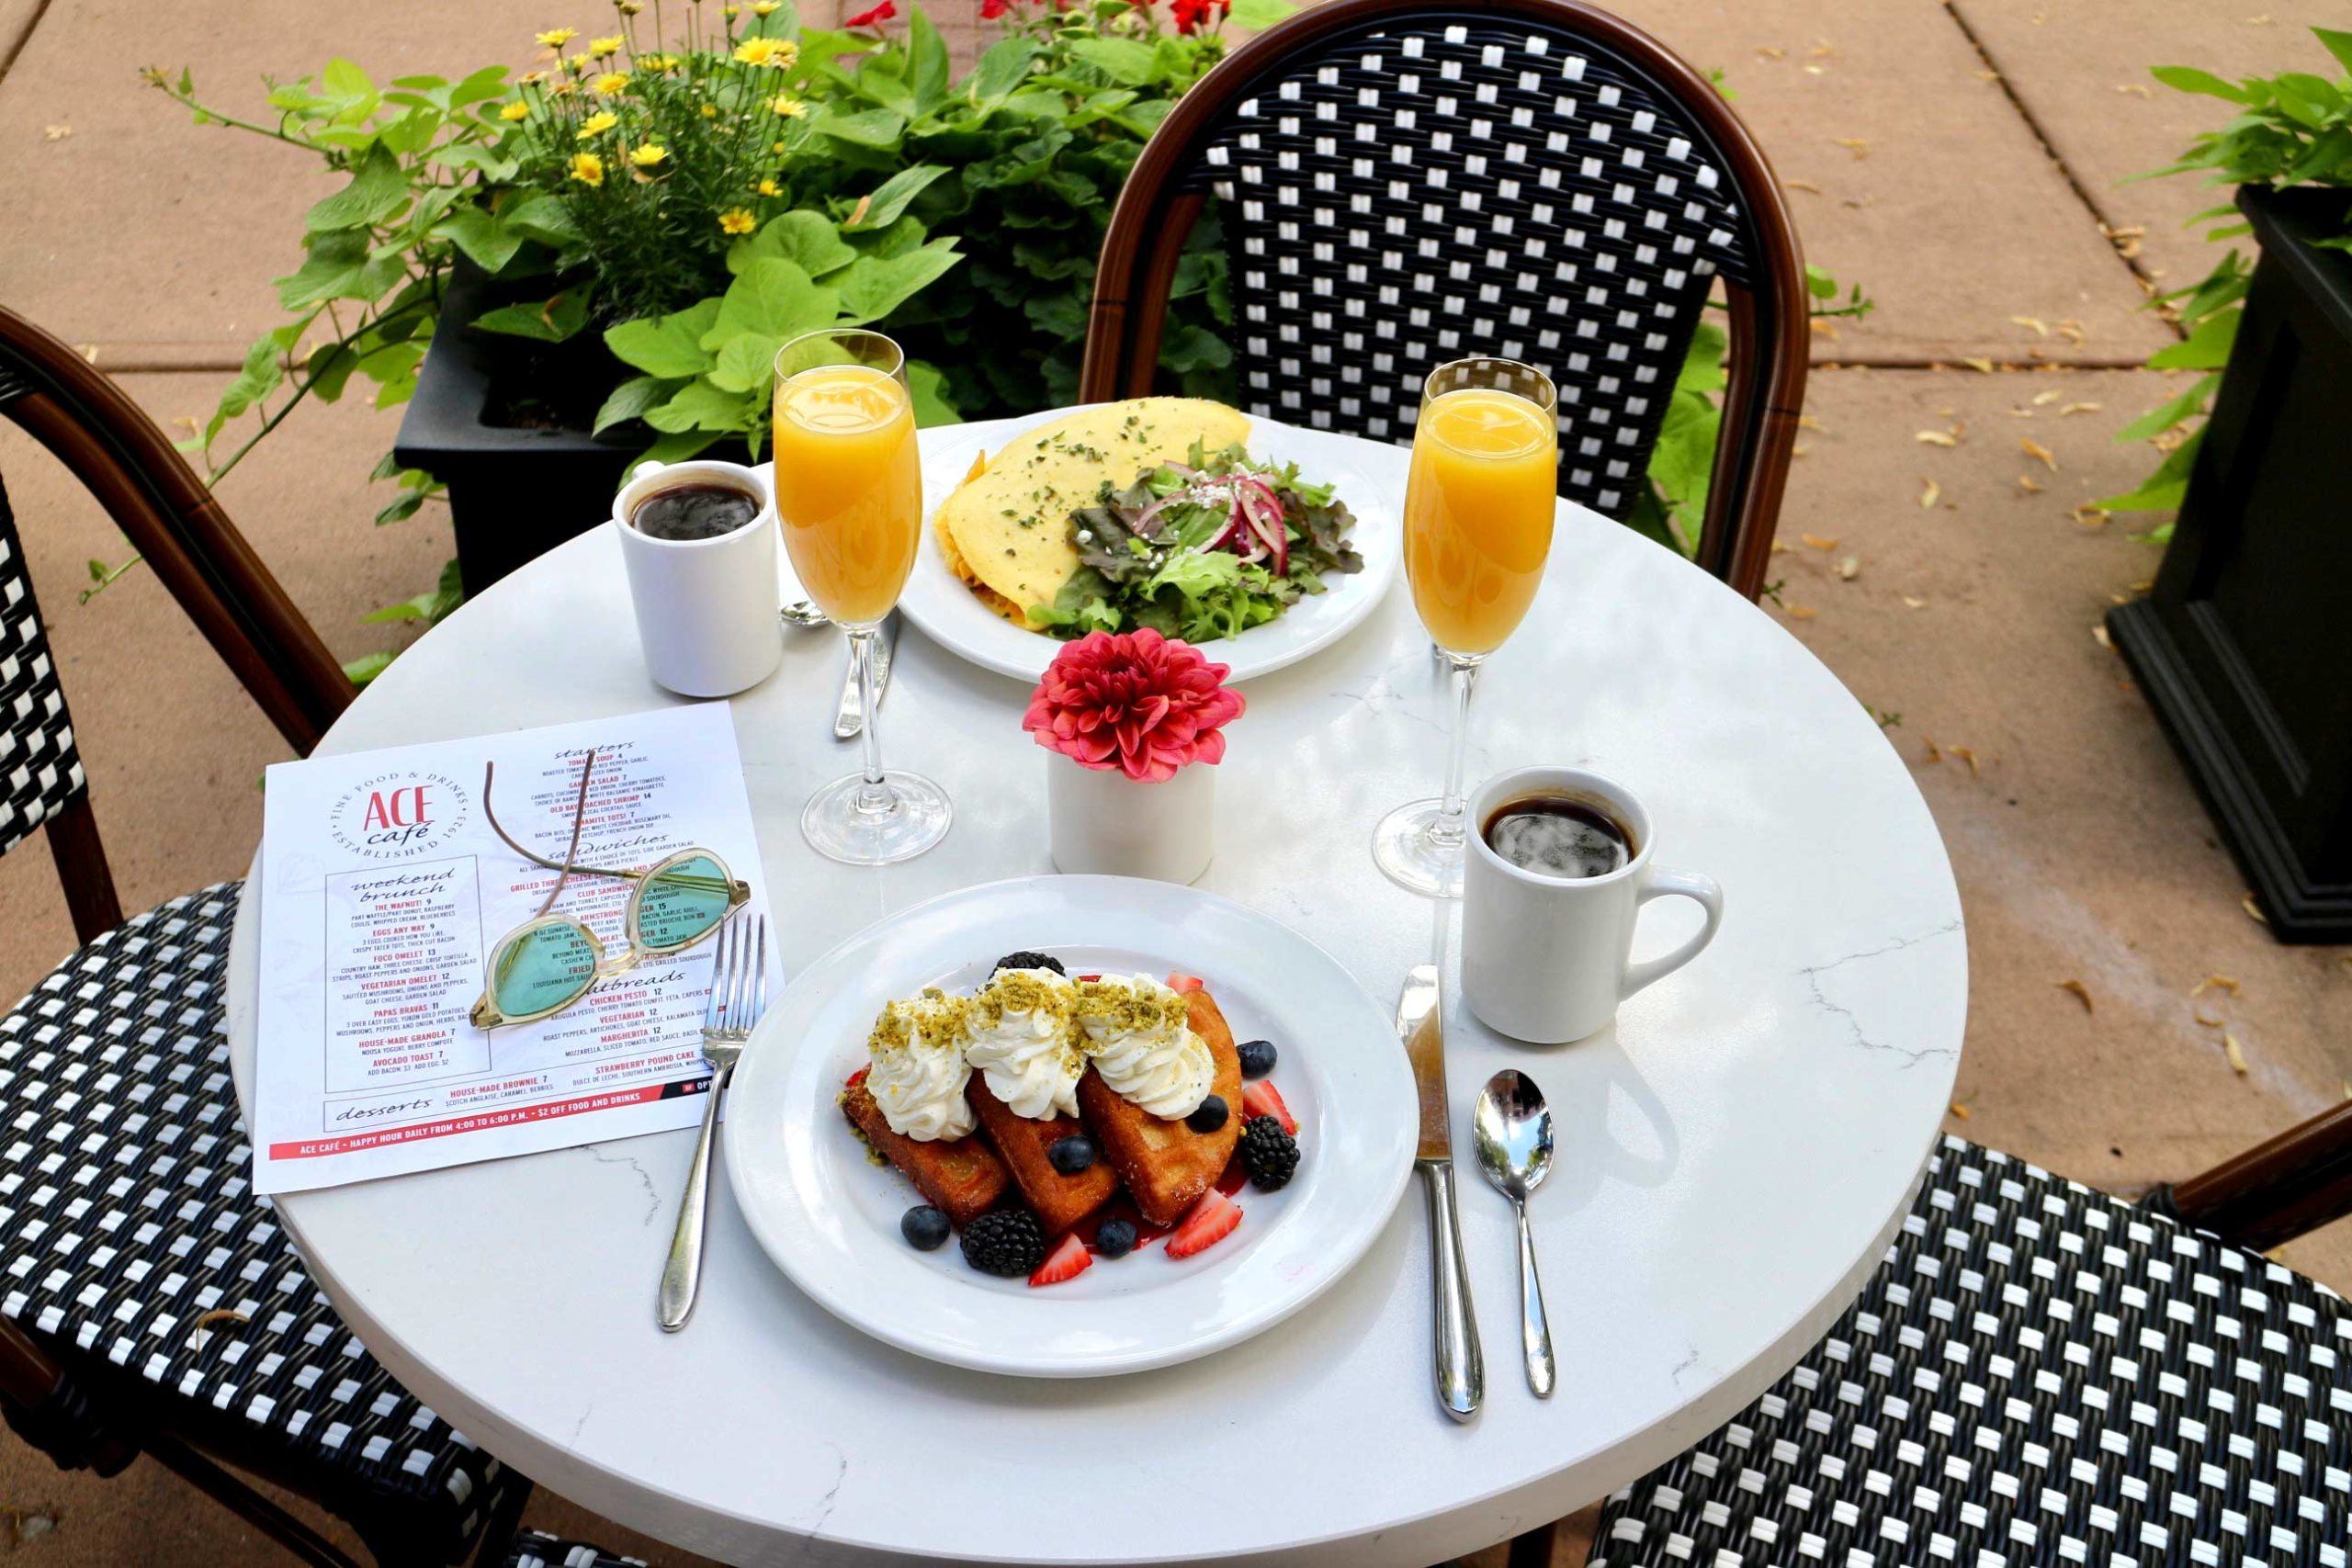 Ace Cafe patio table with brunch items, coffee, and juice